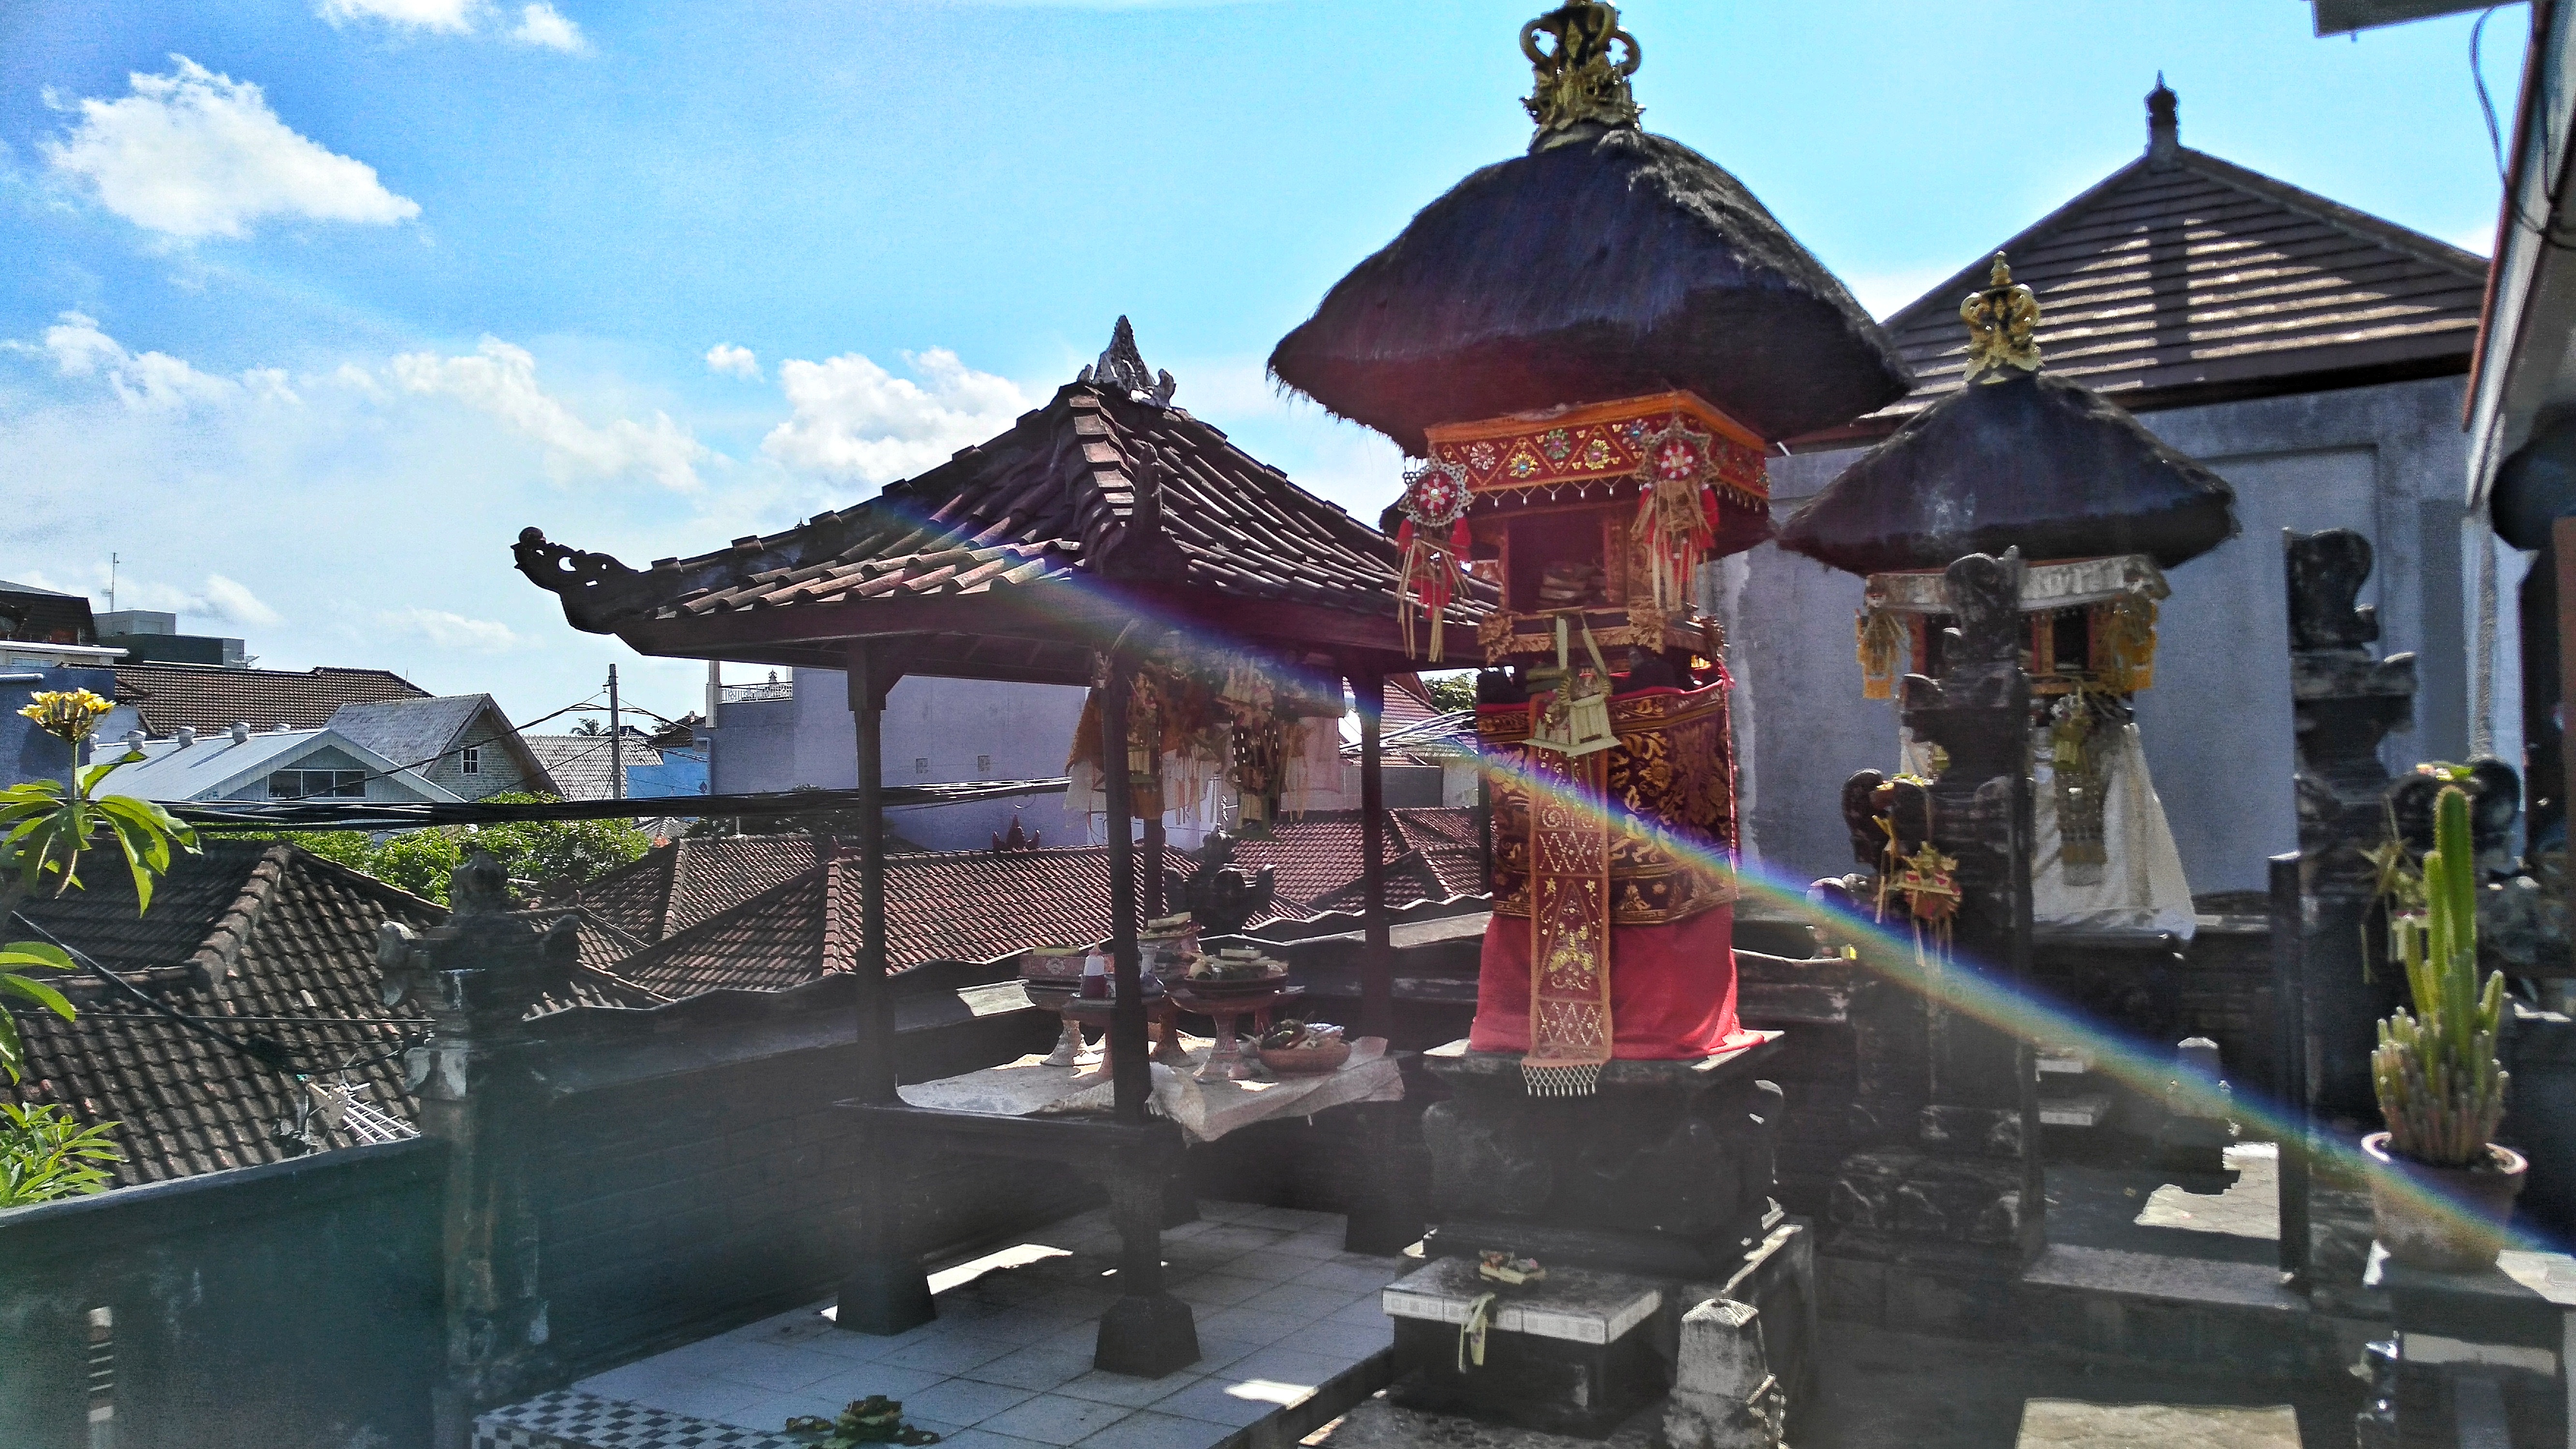 Bali Kira Guesthouse temple on the roof